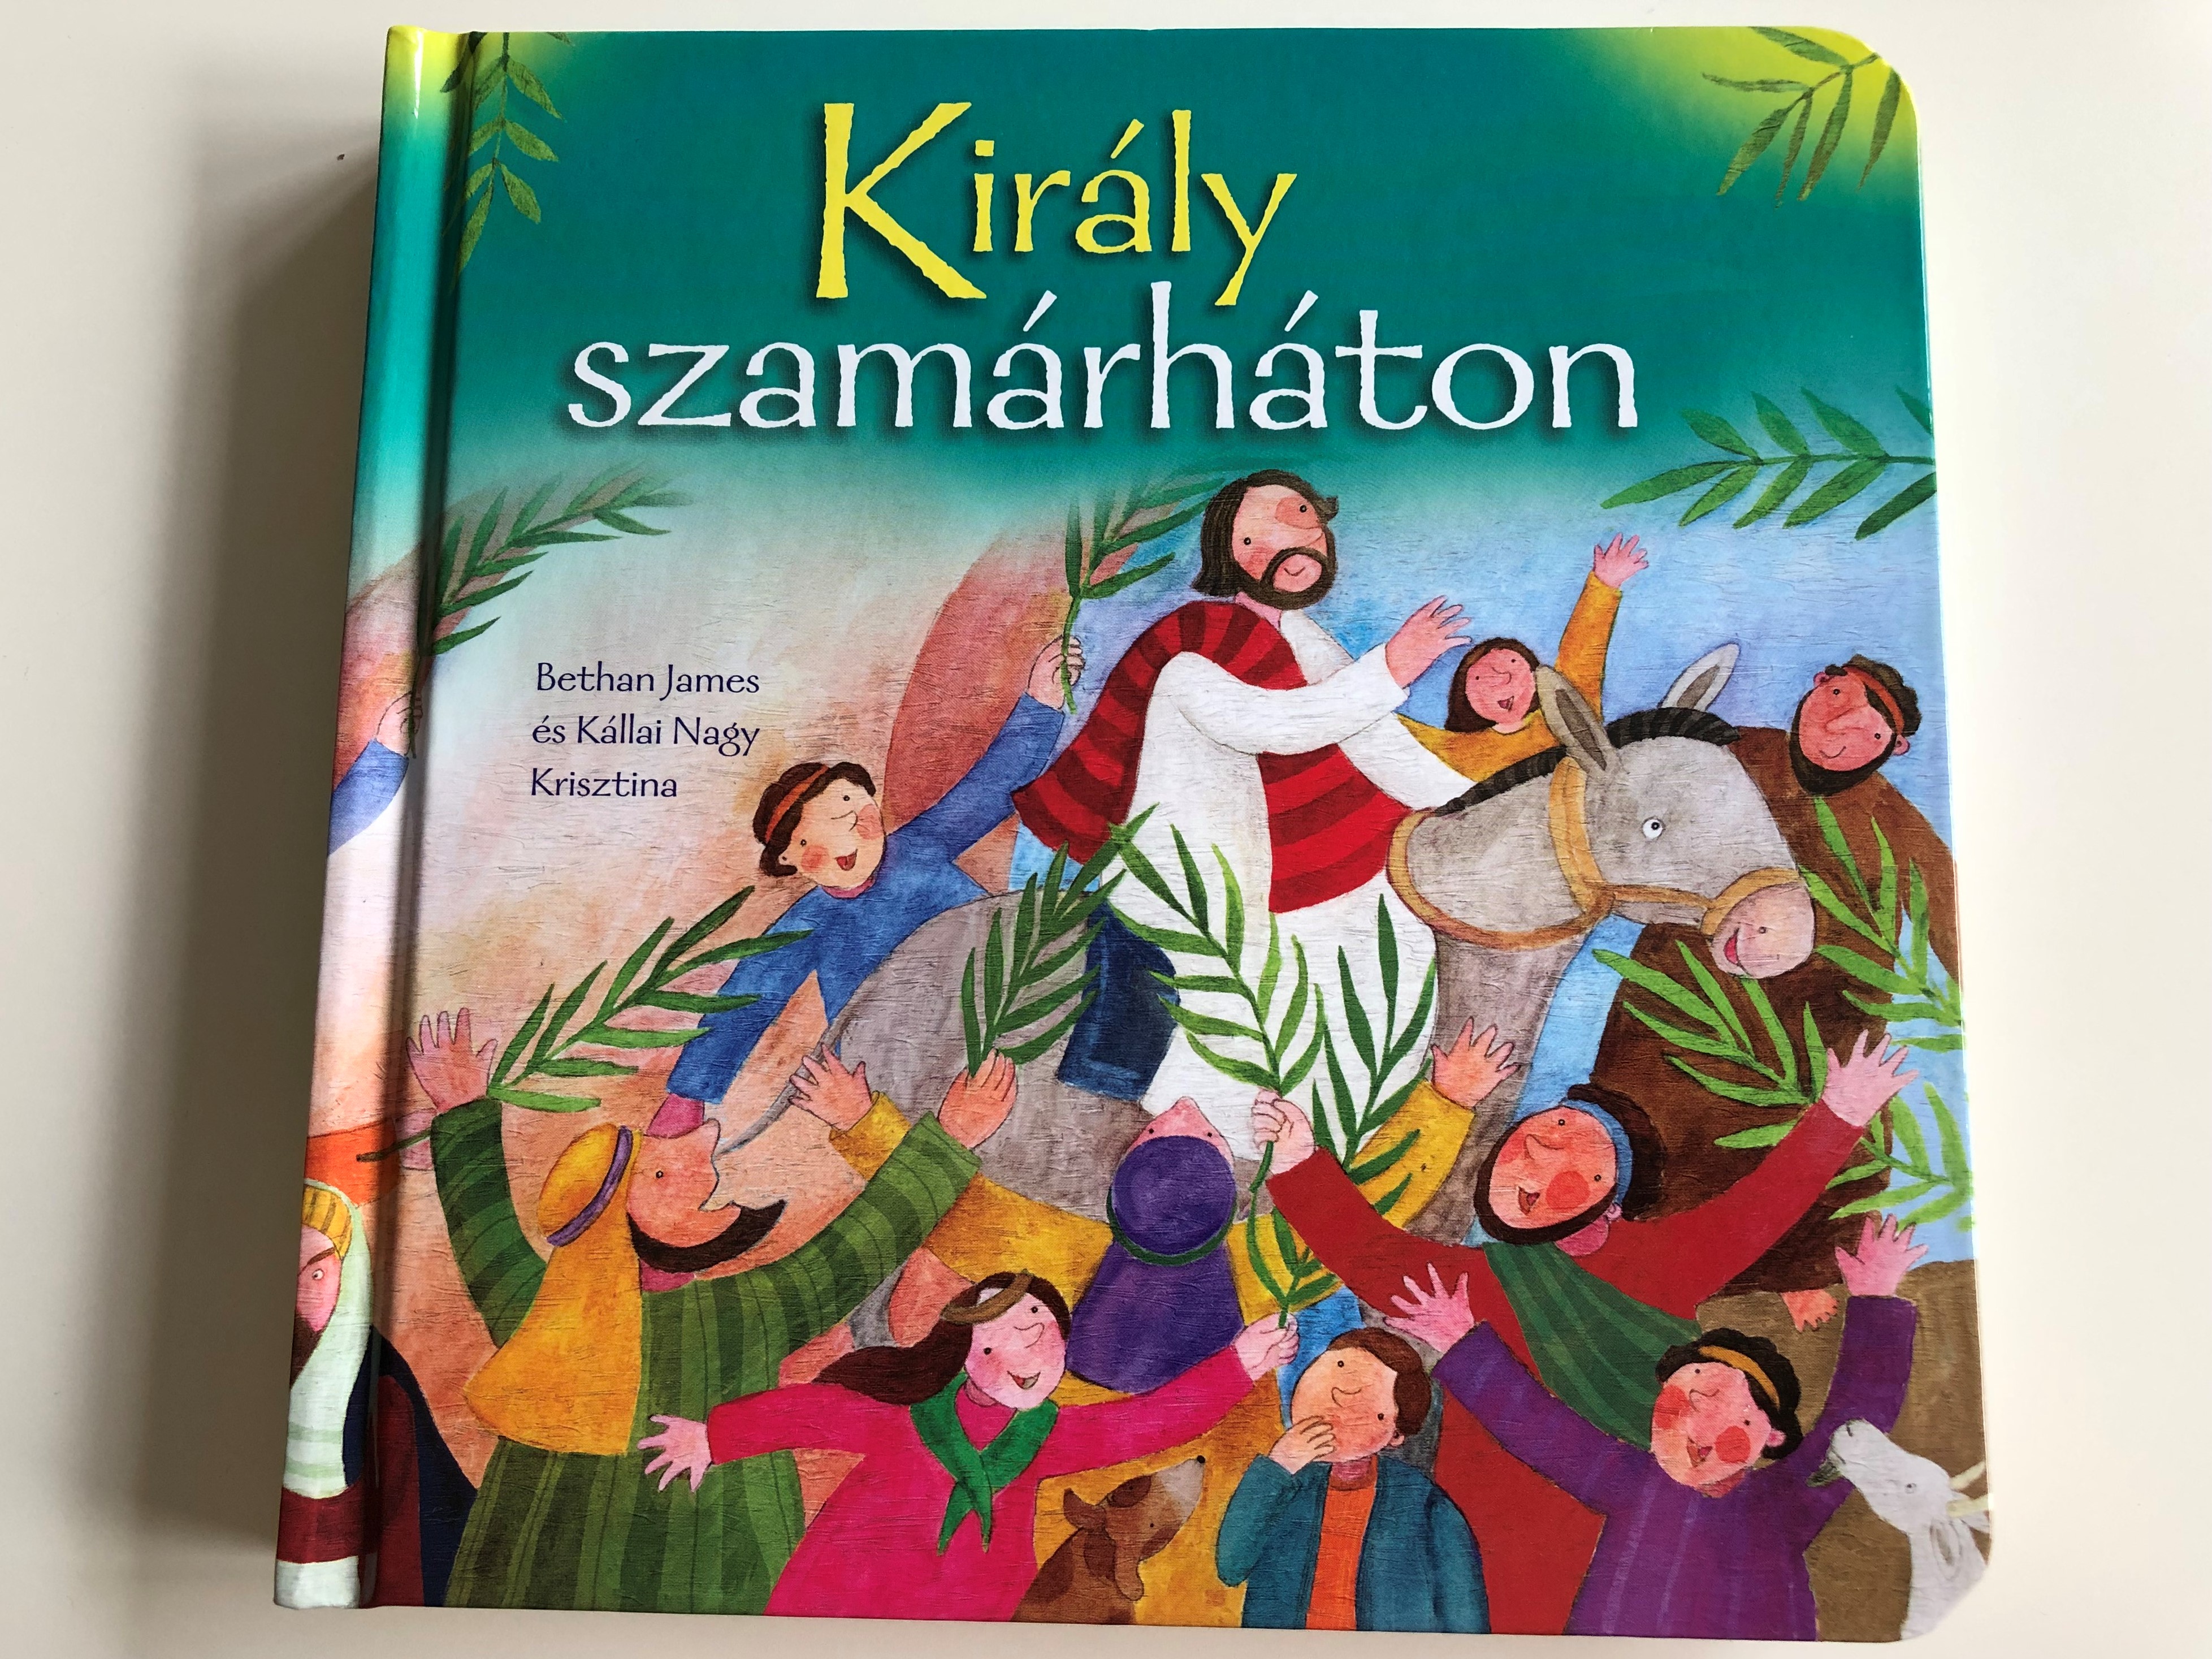 kir-ly-szam-rh-ton-by-bethan-james-k-llai-nagy-krisztina-hungarian-translation-of-the-miracle-of-easter-easter-mini-book-this-vibrant-retelling-of-the-easter-story-covers-biblical-events-from-palm-sunday-through-to-after-jesu-1-.jpg